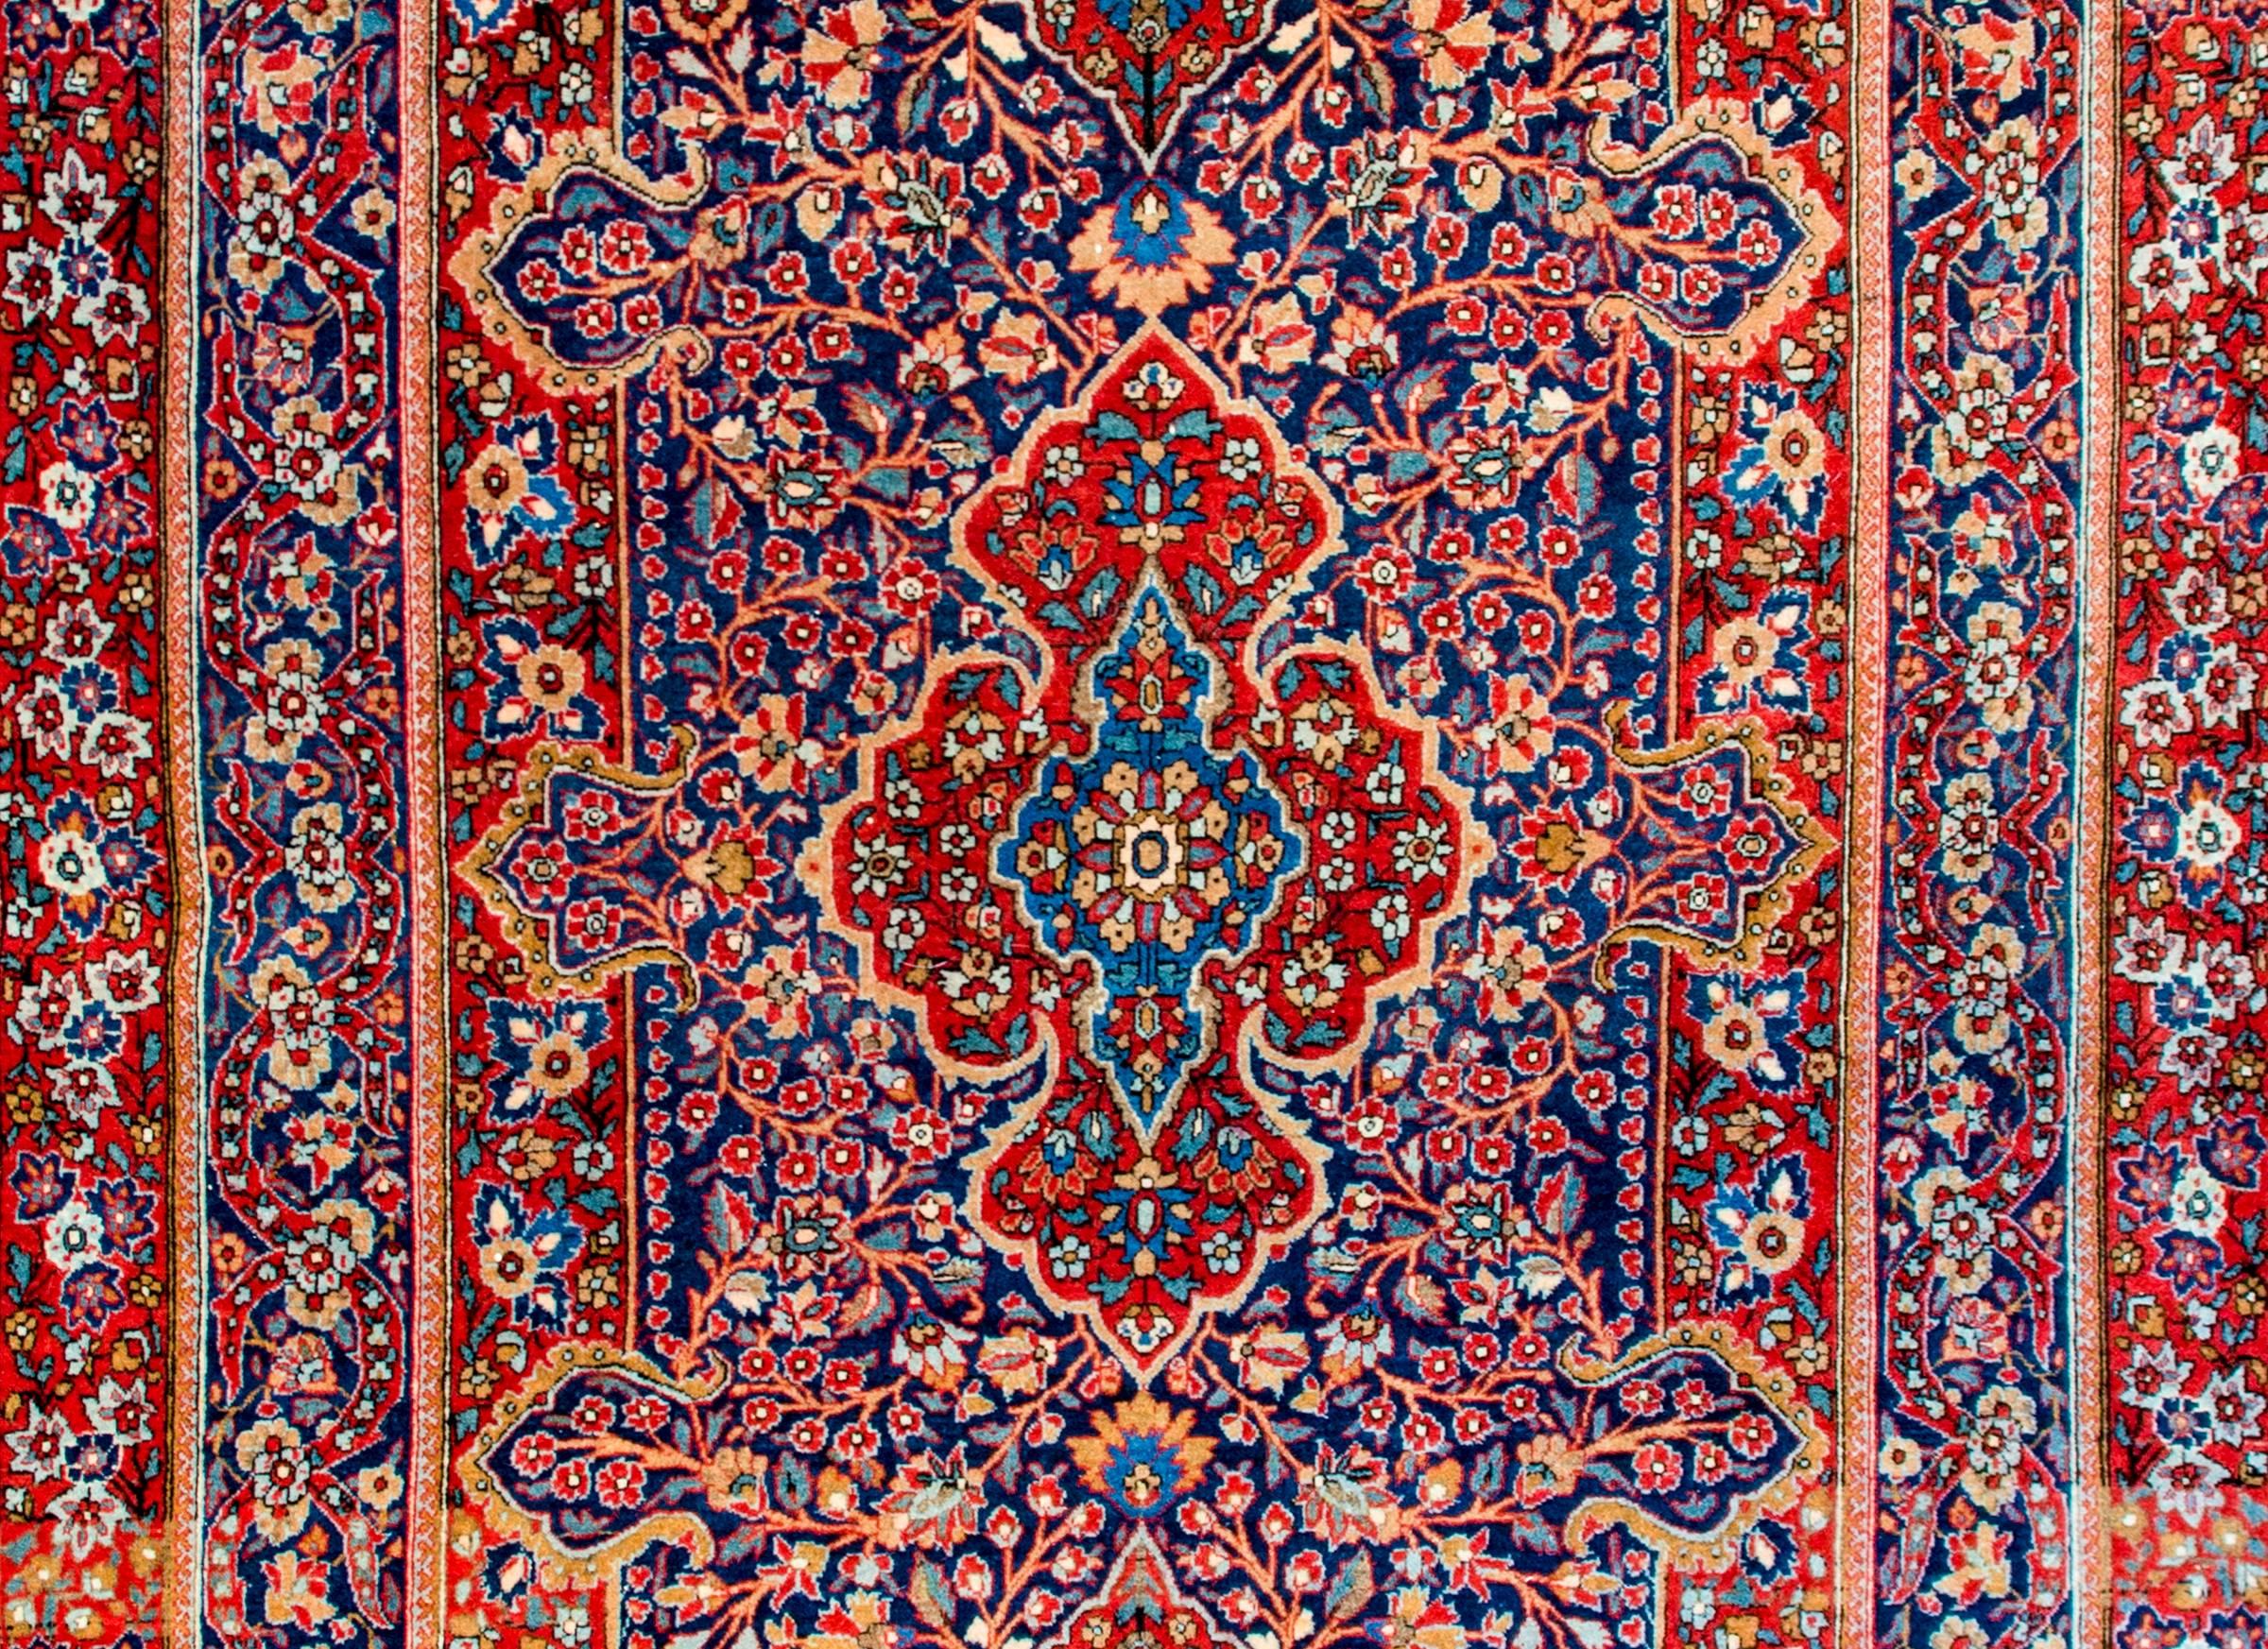 An exceptional early 20th century Persian Kashan rug with a densely woven field and medallion of myriad flowers, leaves, and vines, all woven in crimson, indigo, gold, pink, and cream colored vegetable dyed wool. The border is complex and as densely